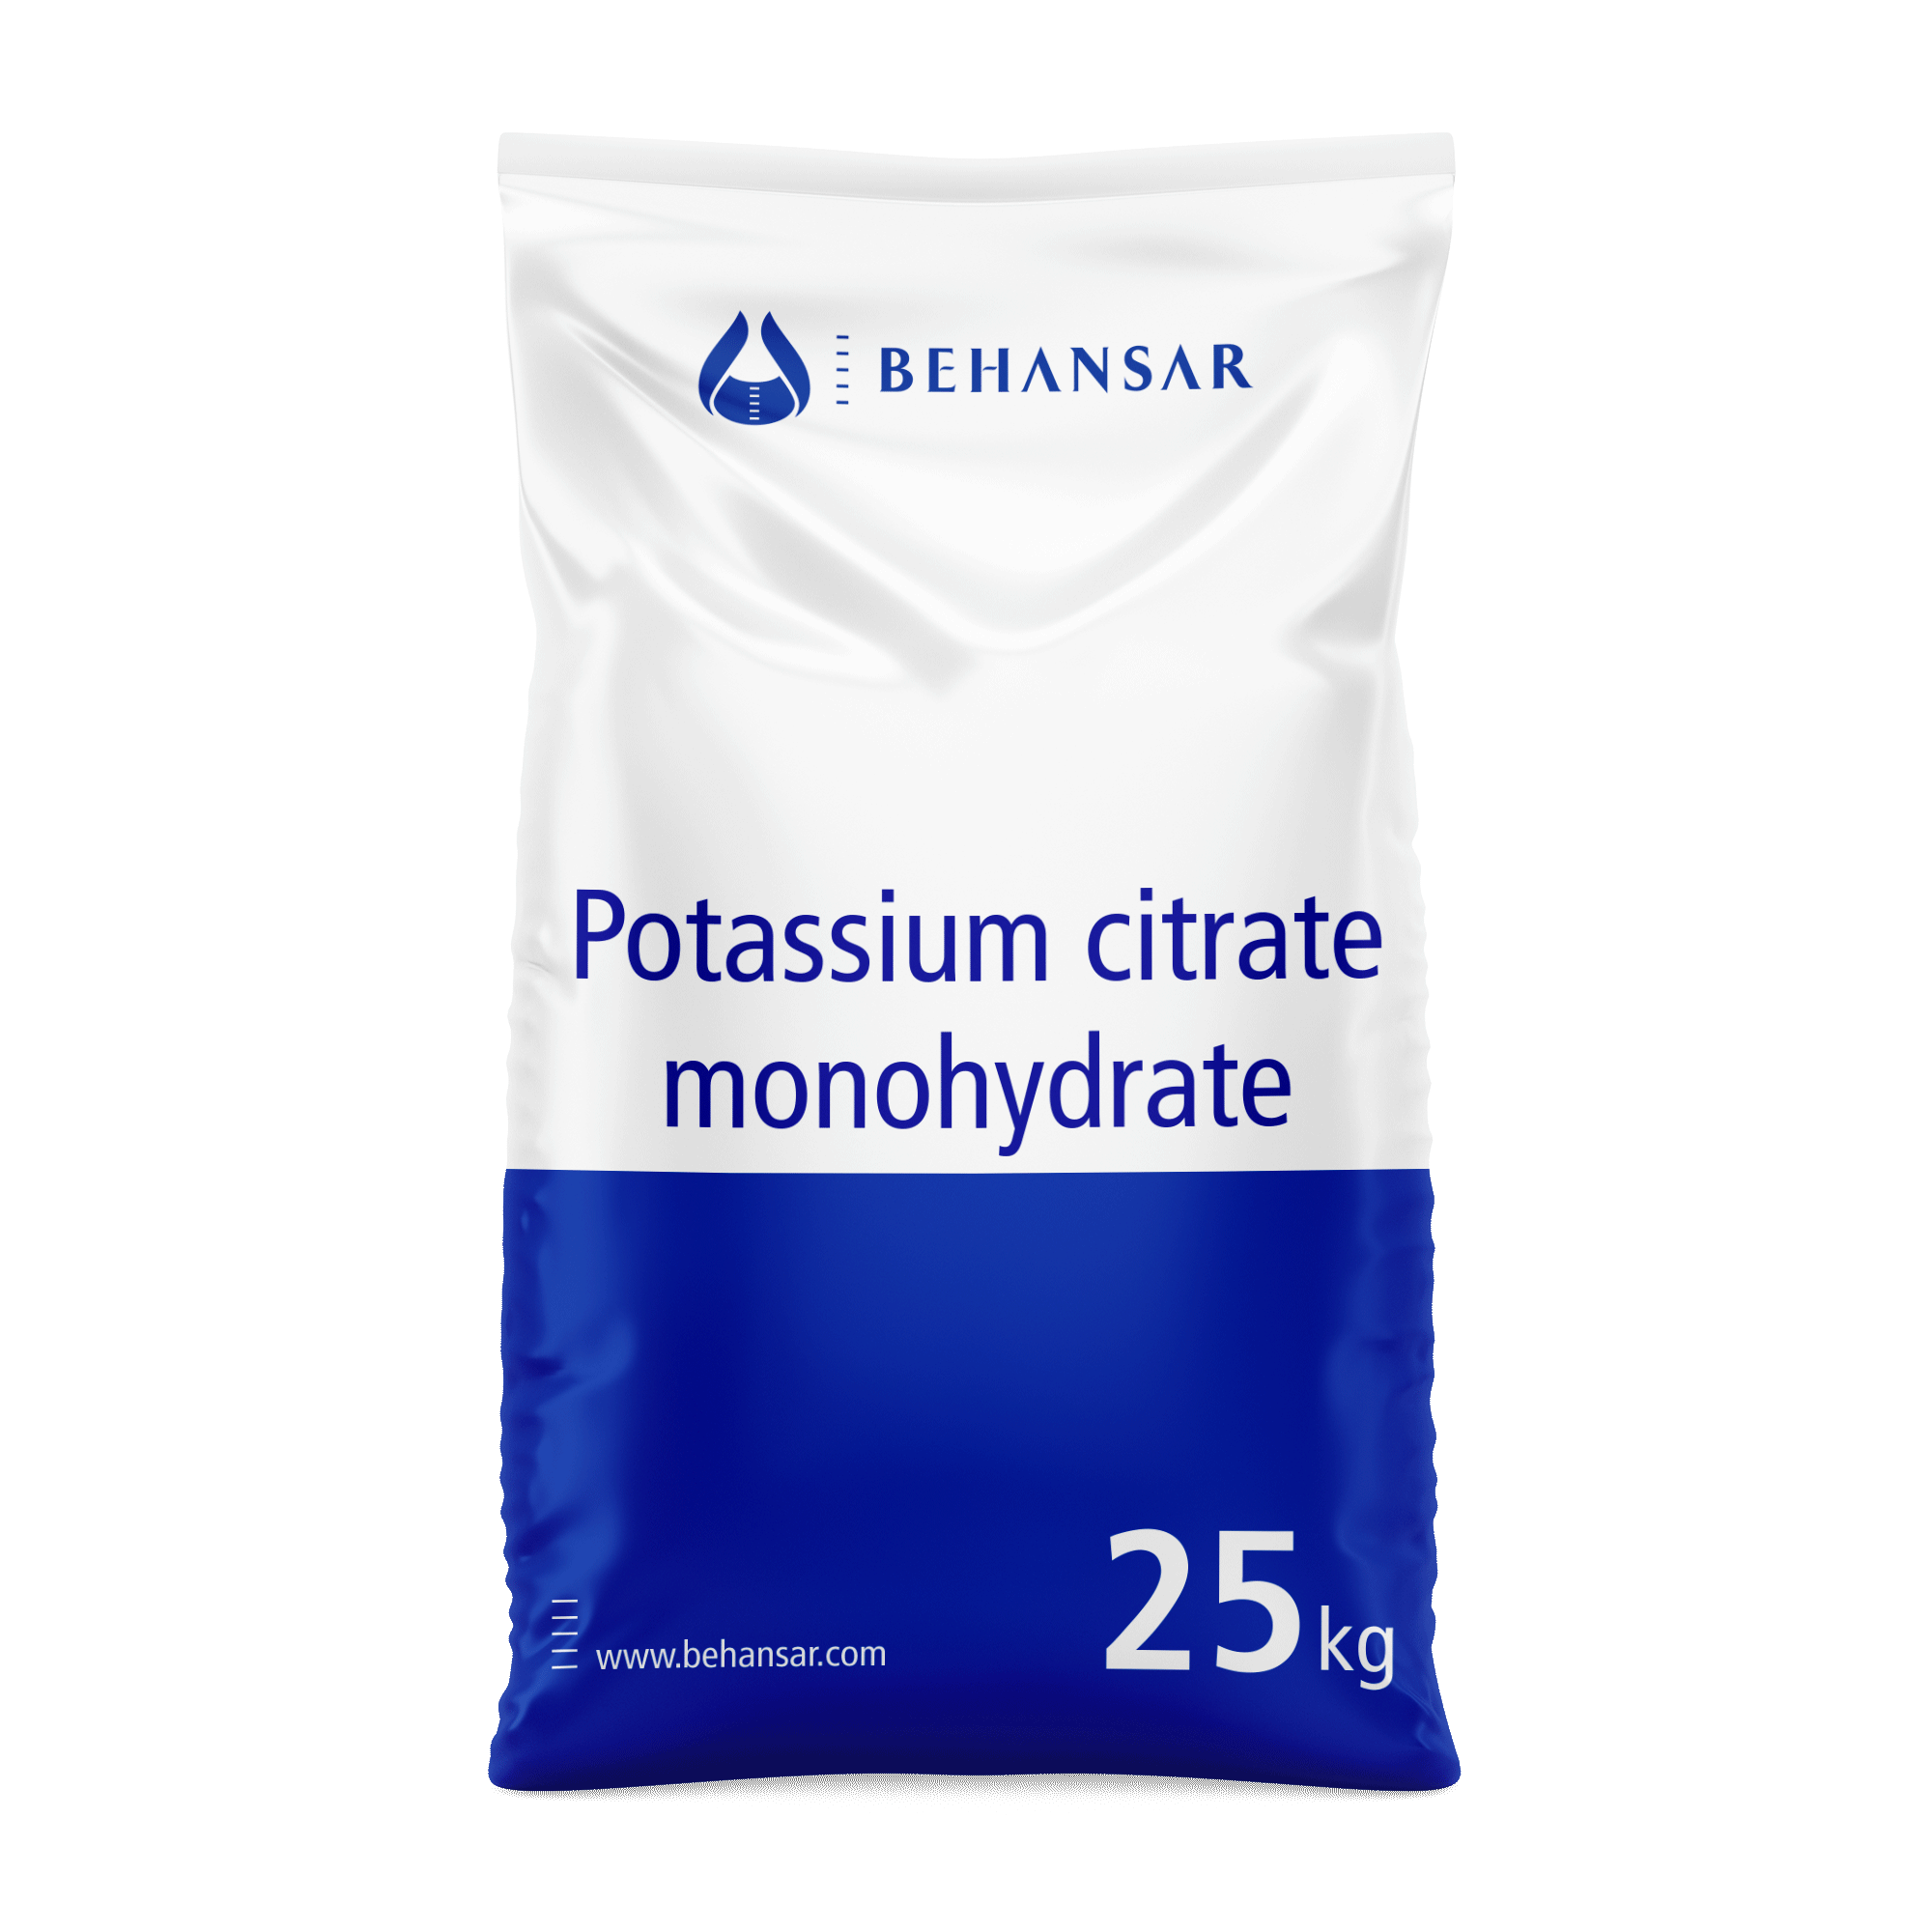 Potassium citrate monohydrate is one of the products of Behansar Co